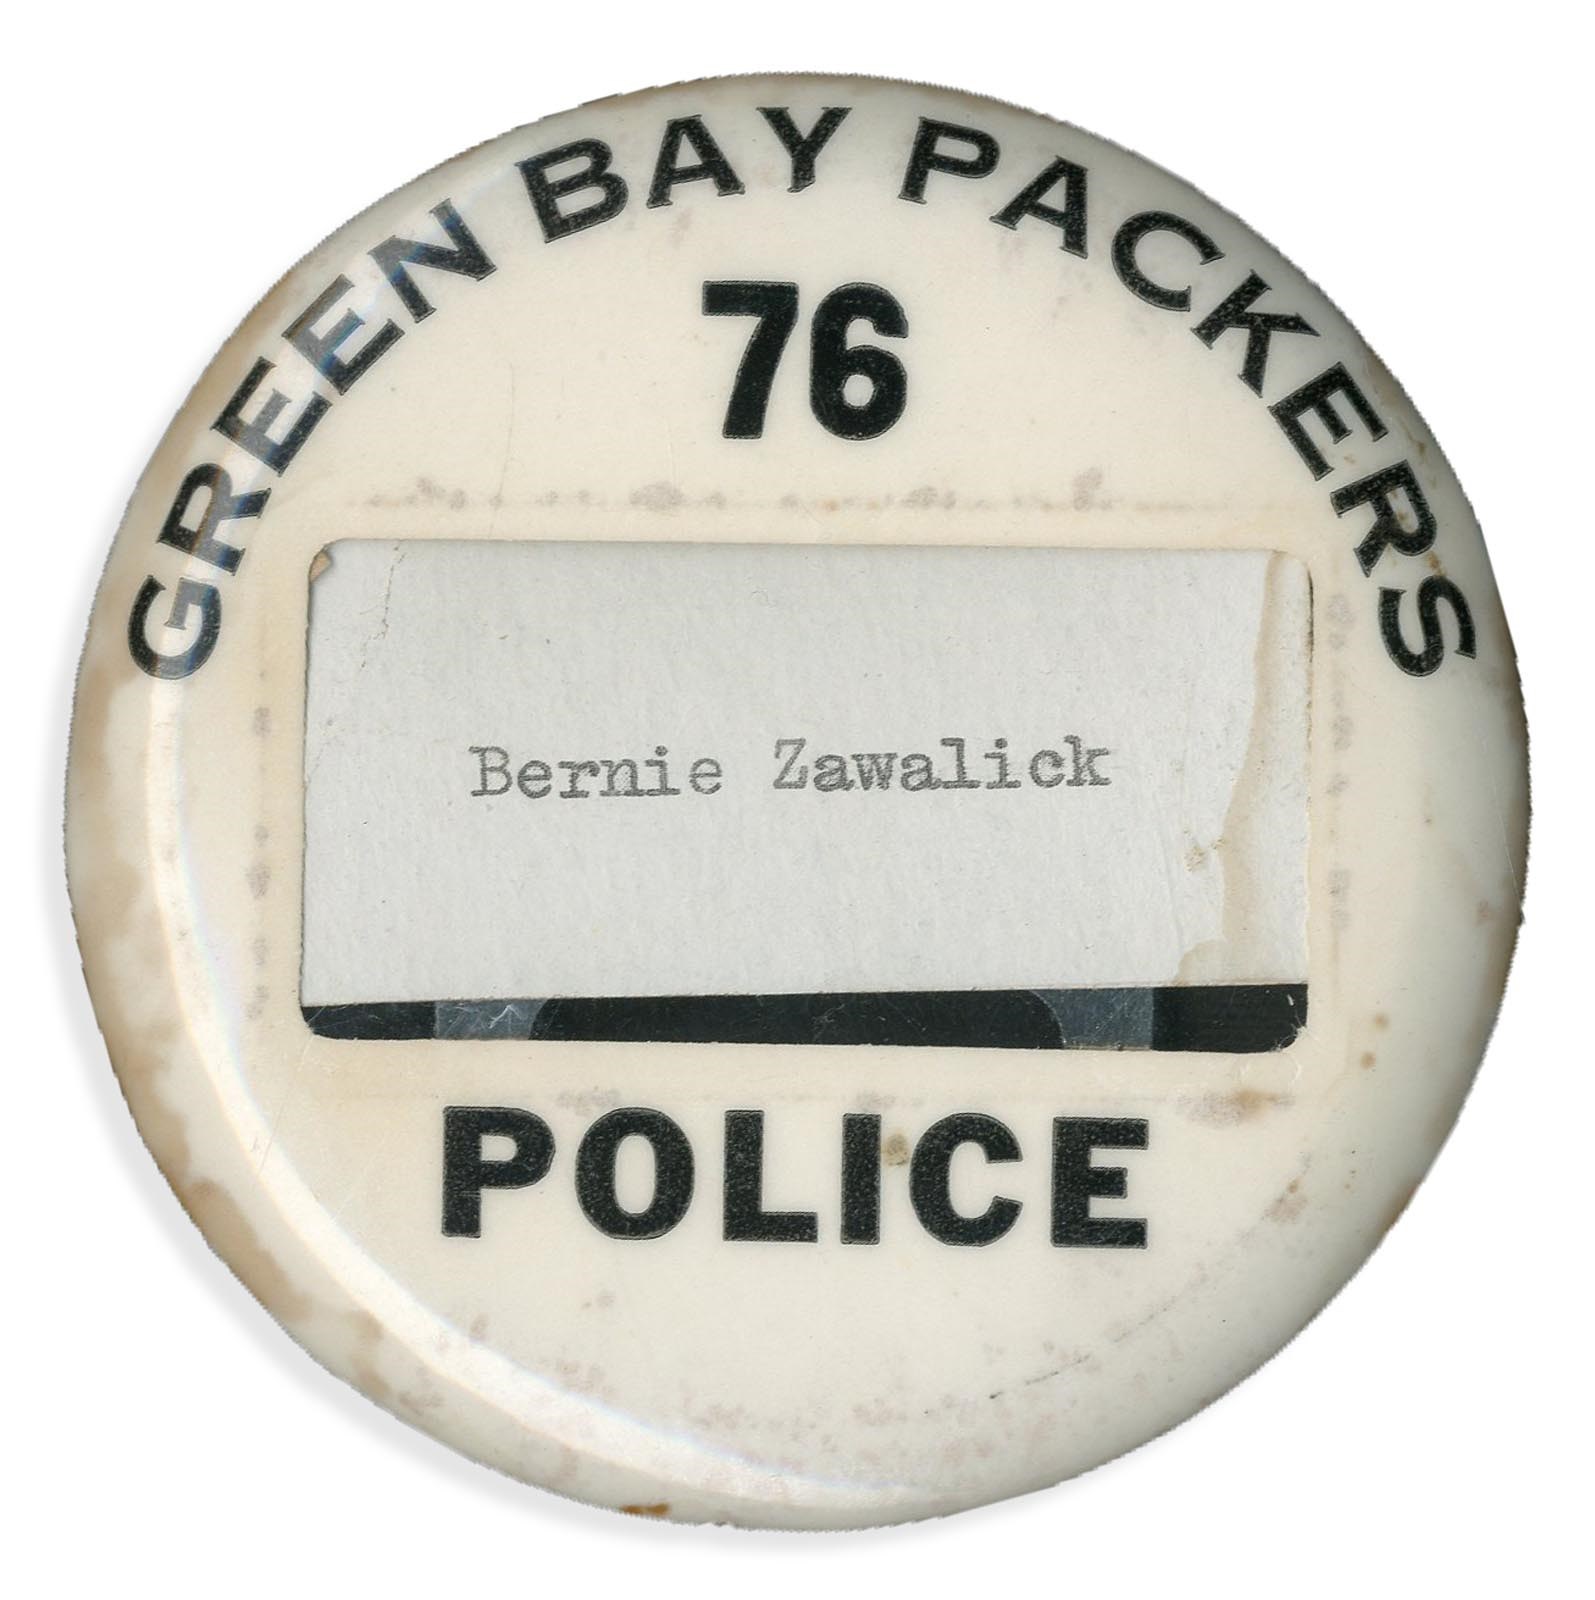 Football - 1960s Green Bay Packers Police Button